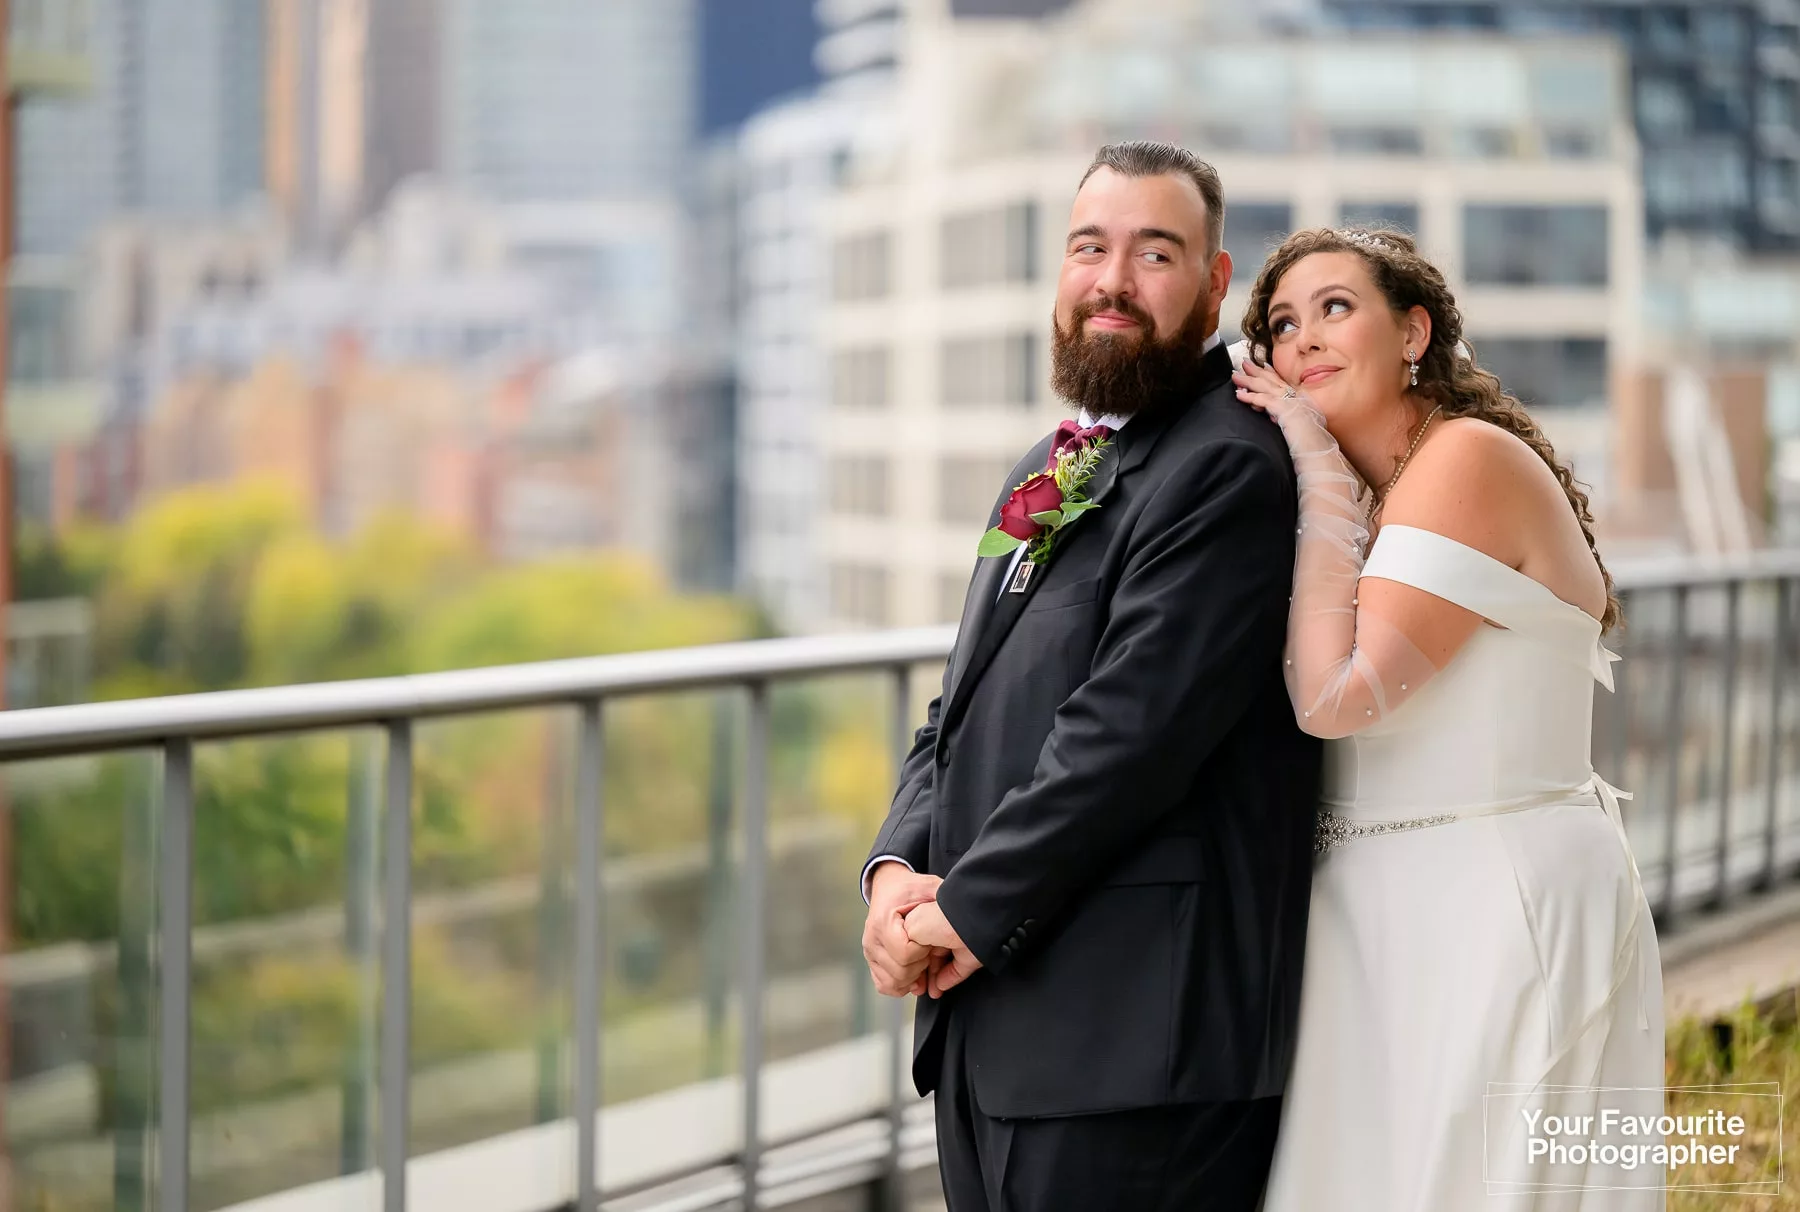 Bride leans against a groom as they pose on a rooftop patio with a garden and city in the background